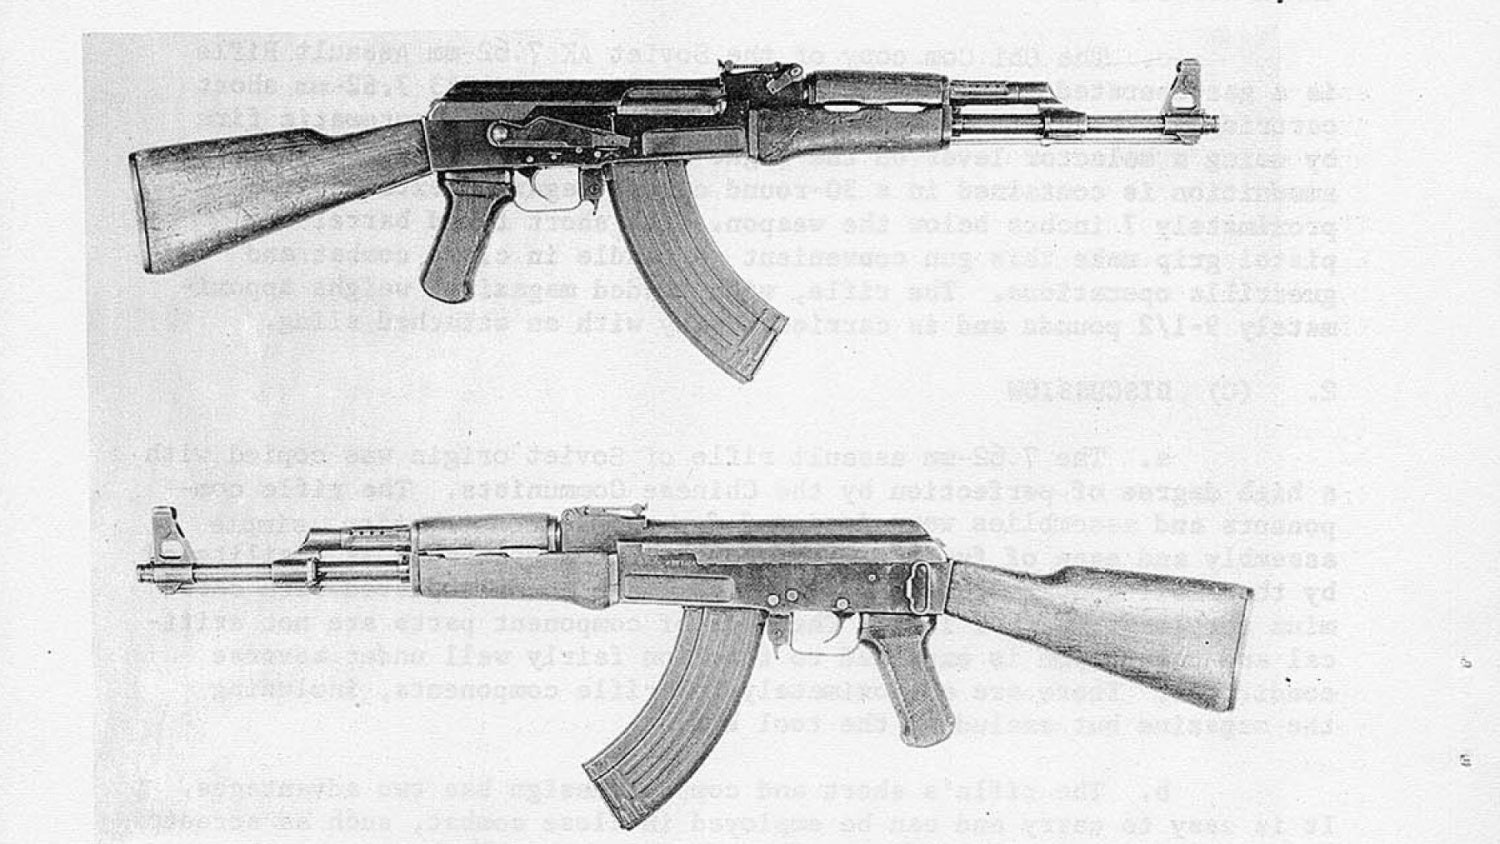 Early Chinese Type 56 AK captured by US forces in 1964